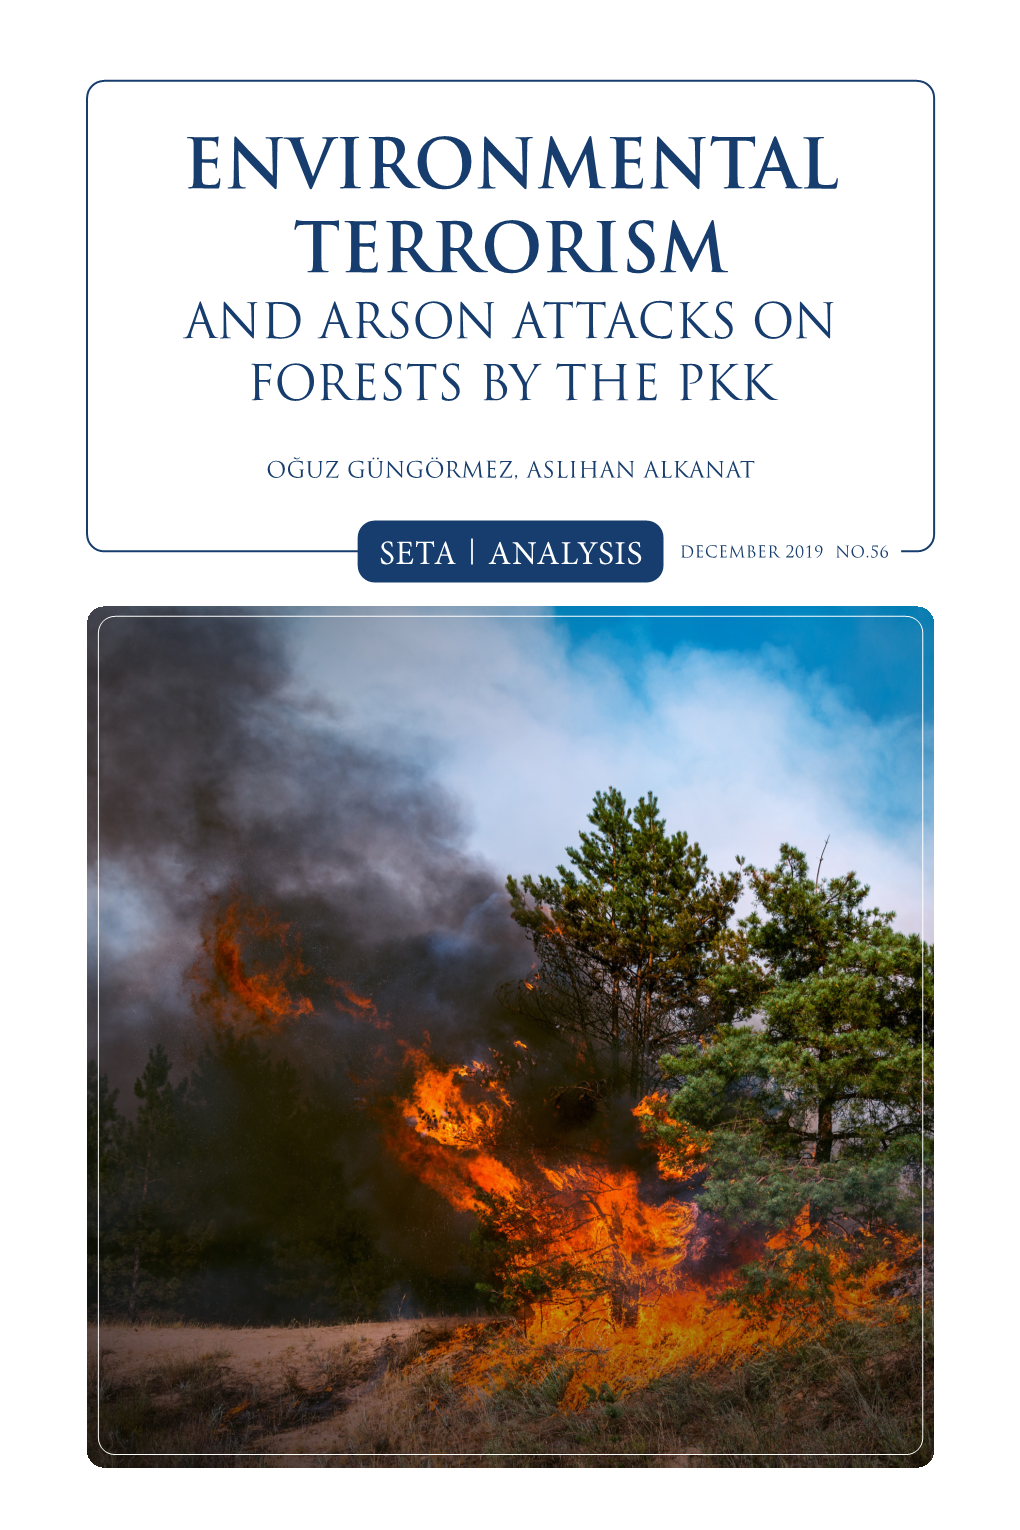 Environmental Terrorism and Arson Attacks on Forests by the Pkk